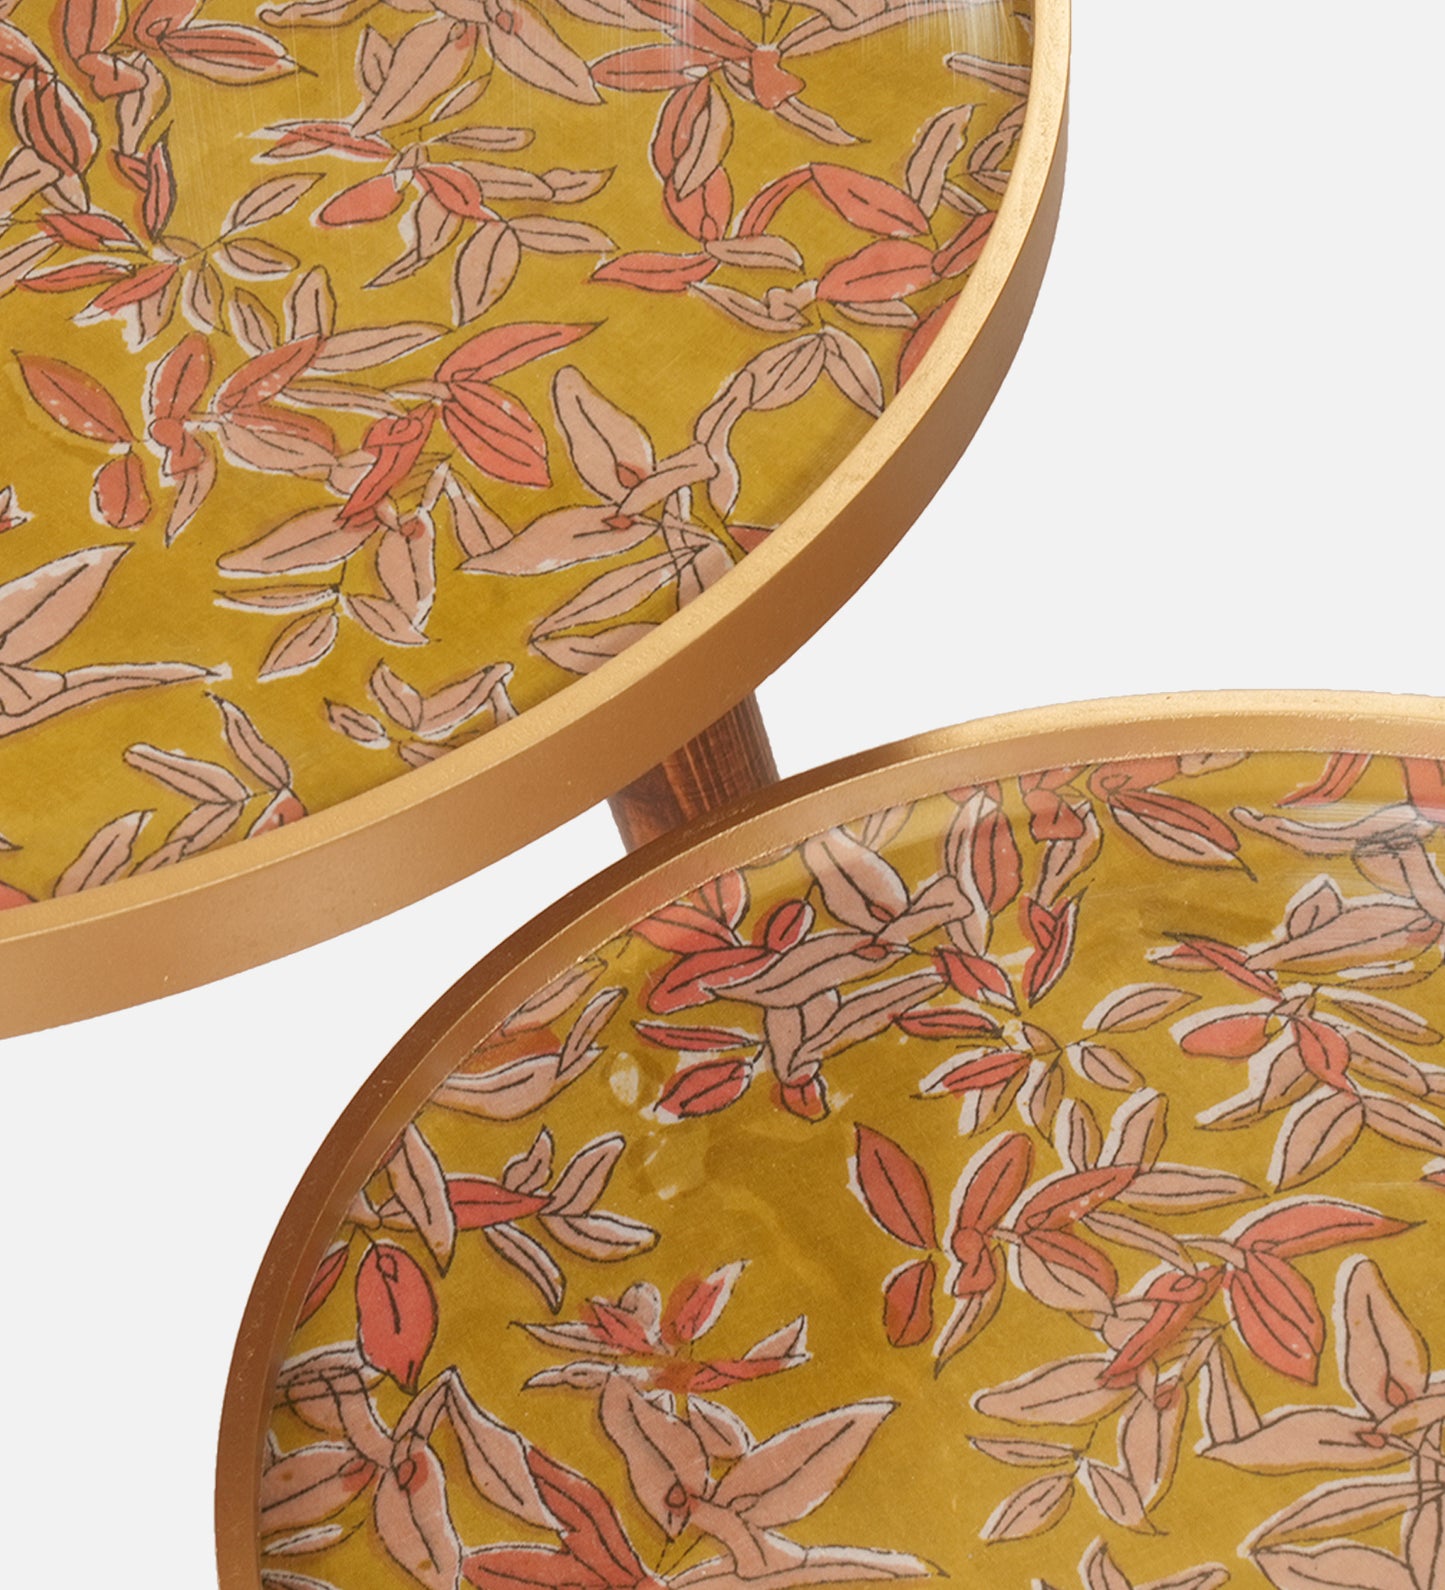 Peach and Gold Floral Round Nesting Tables with Wooden Legs, Side Tables, Wooden Tables, Living Room Decor by A Tiny Mistake